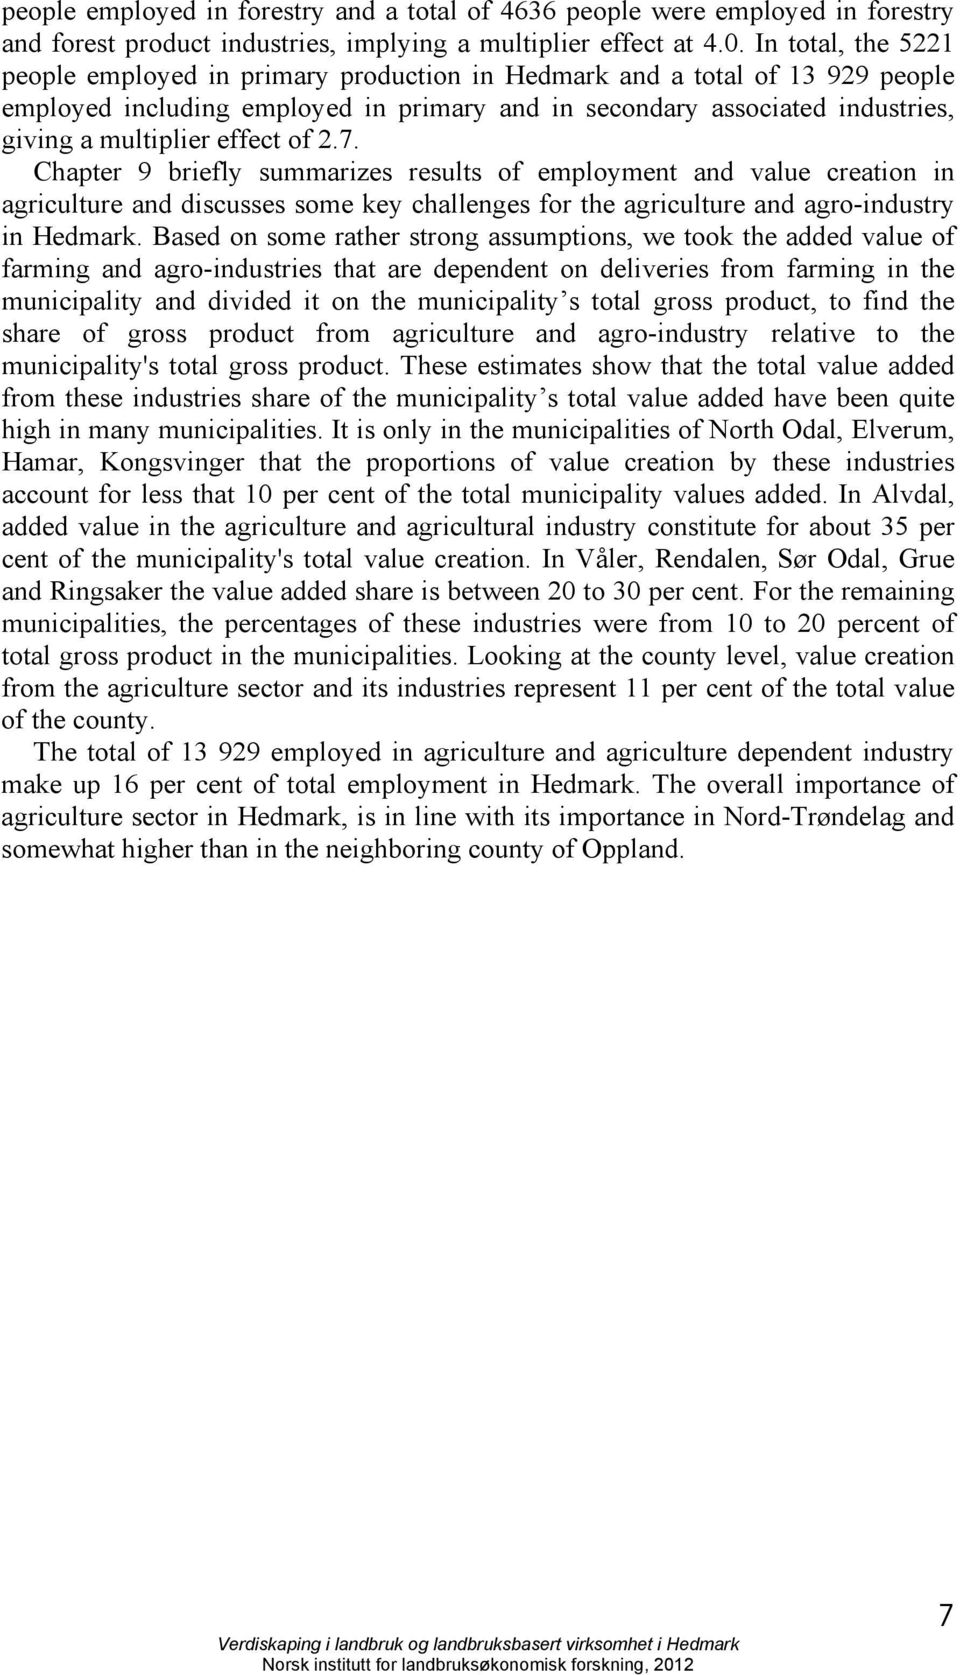 effect of 2.7. Chapter 9 briefly summarizes results of employment and value creation in agriculture and discusses some key challenges for the agriculture and agro-industry in Hedmark.